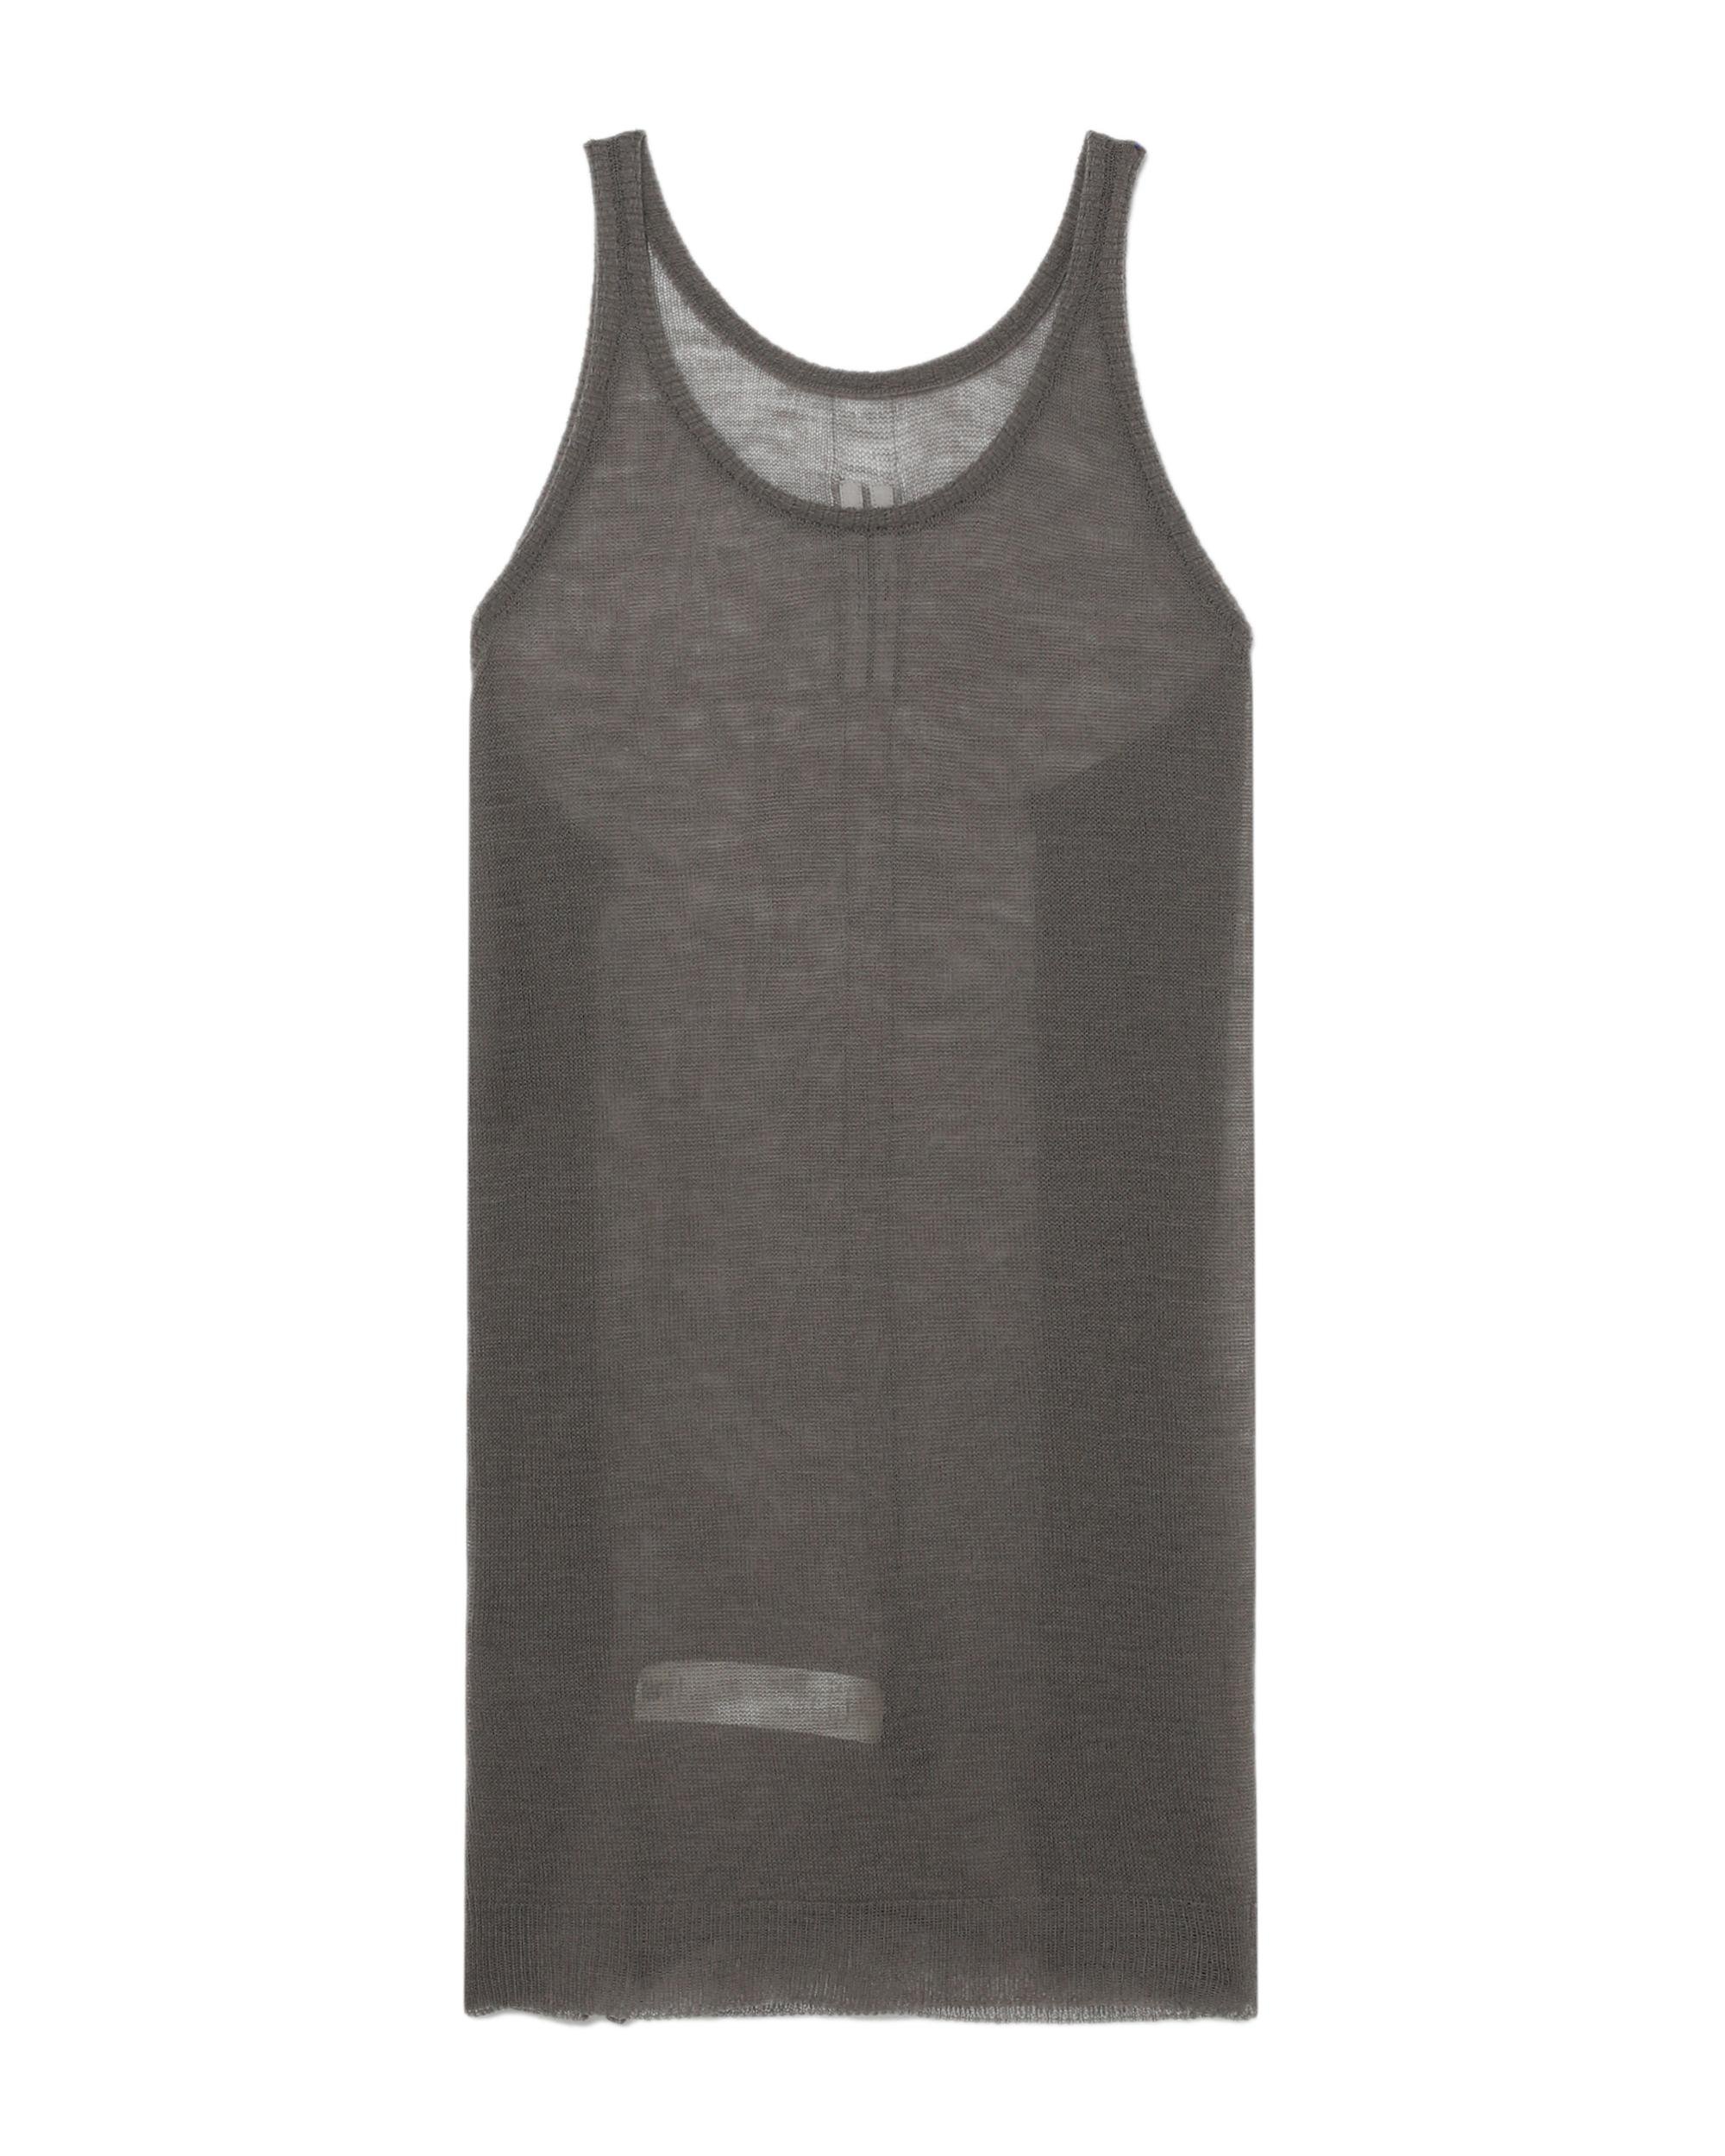 Knit tank top by RICK OWENS